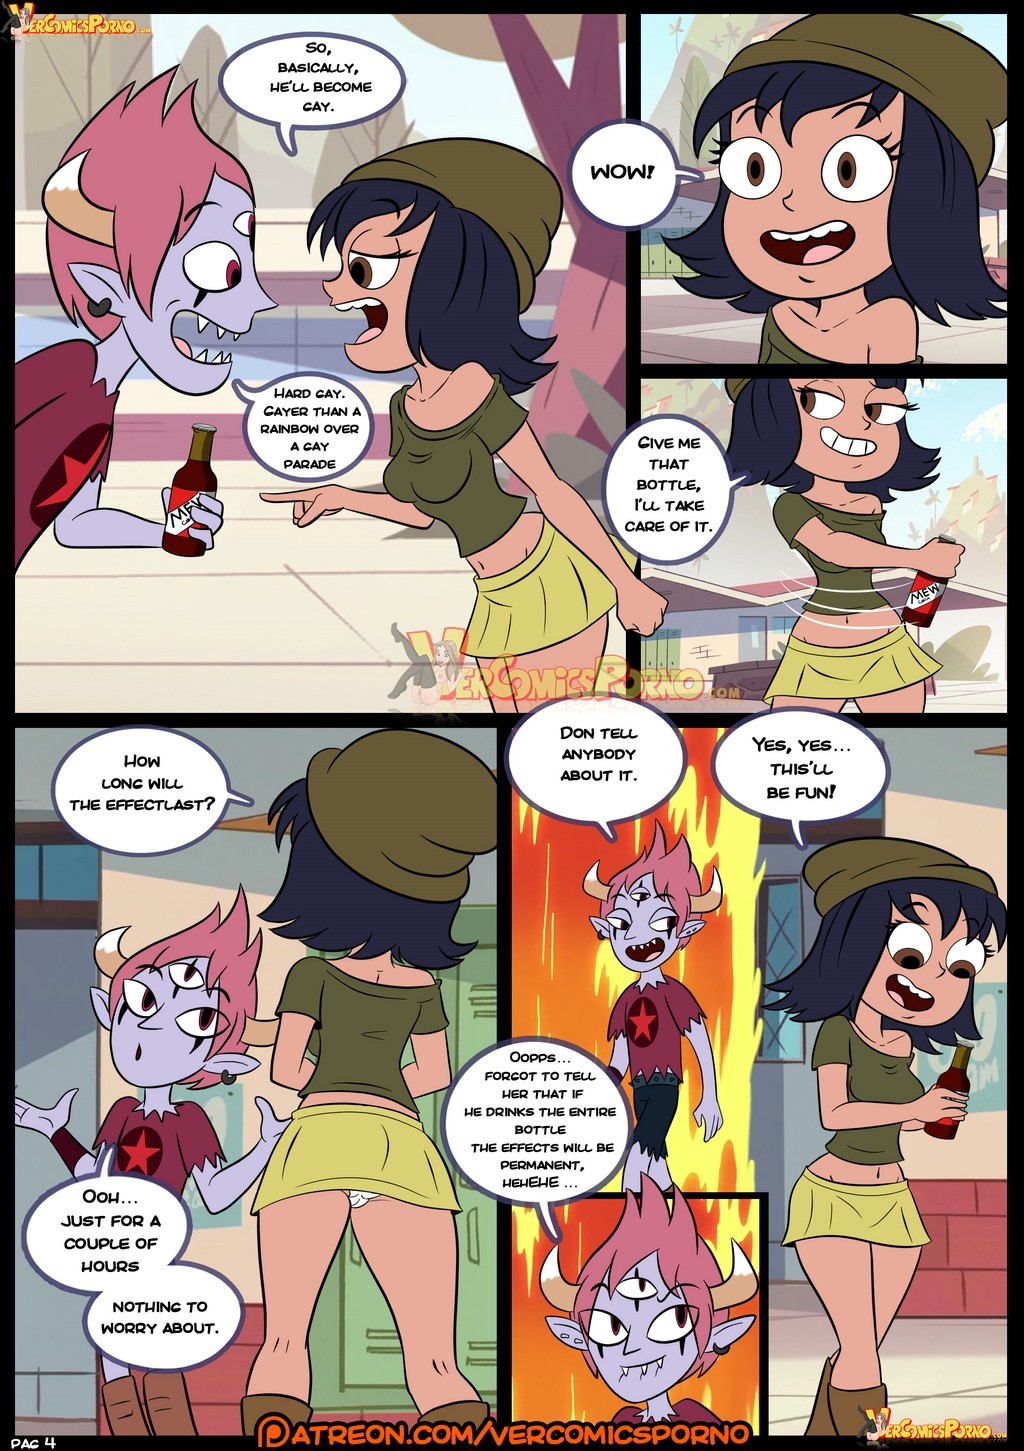 Croc-Star-Vs-the-forces-of-sex-III-5.jpg